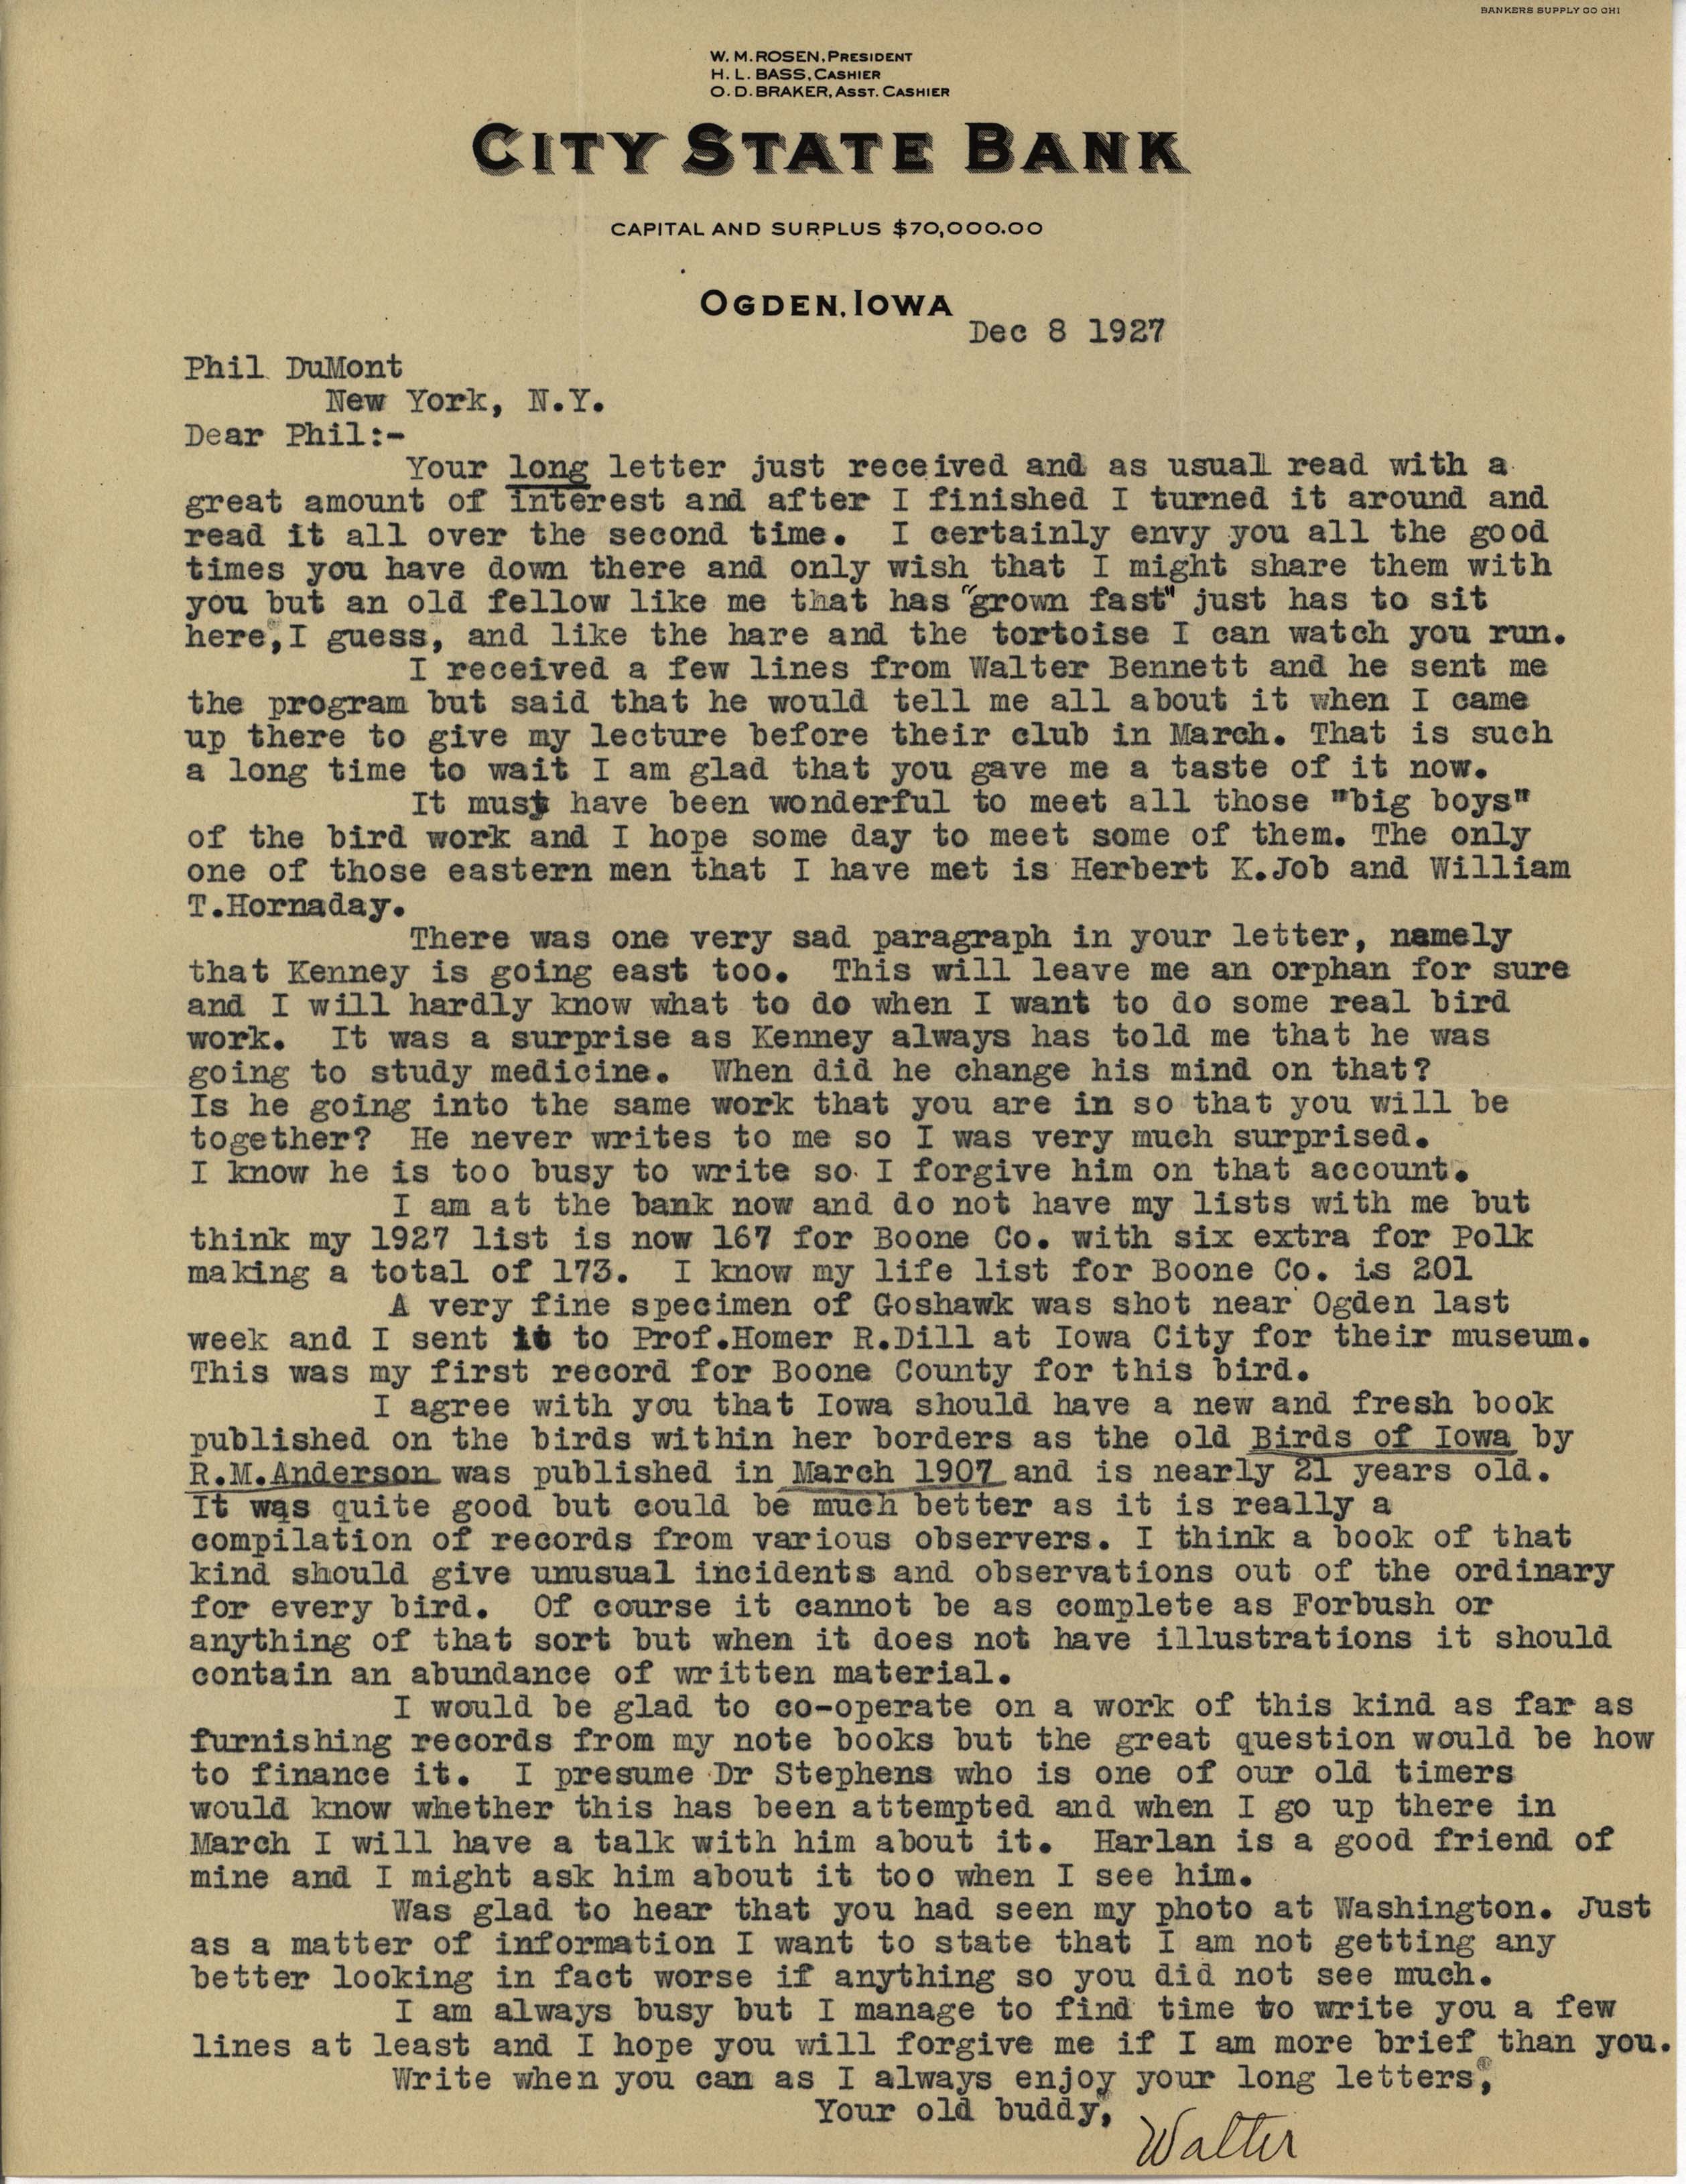 Walter Rosene letter to Philip DuMont regarding publishing a book about the Birds of Iowa, December 8, 1927